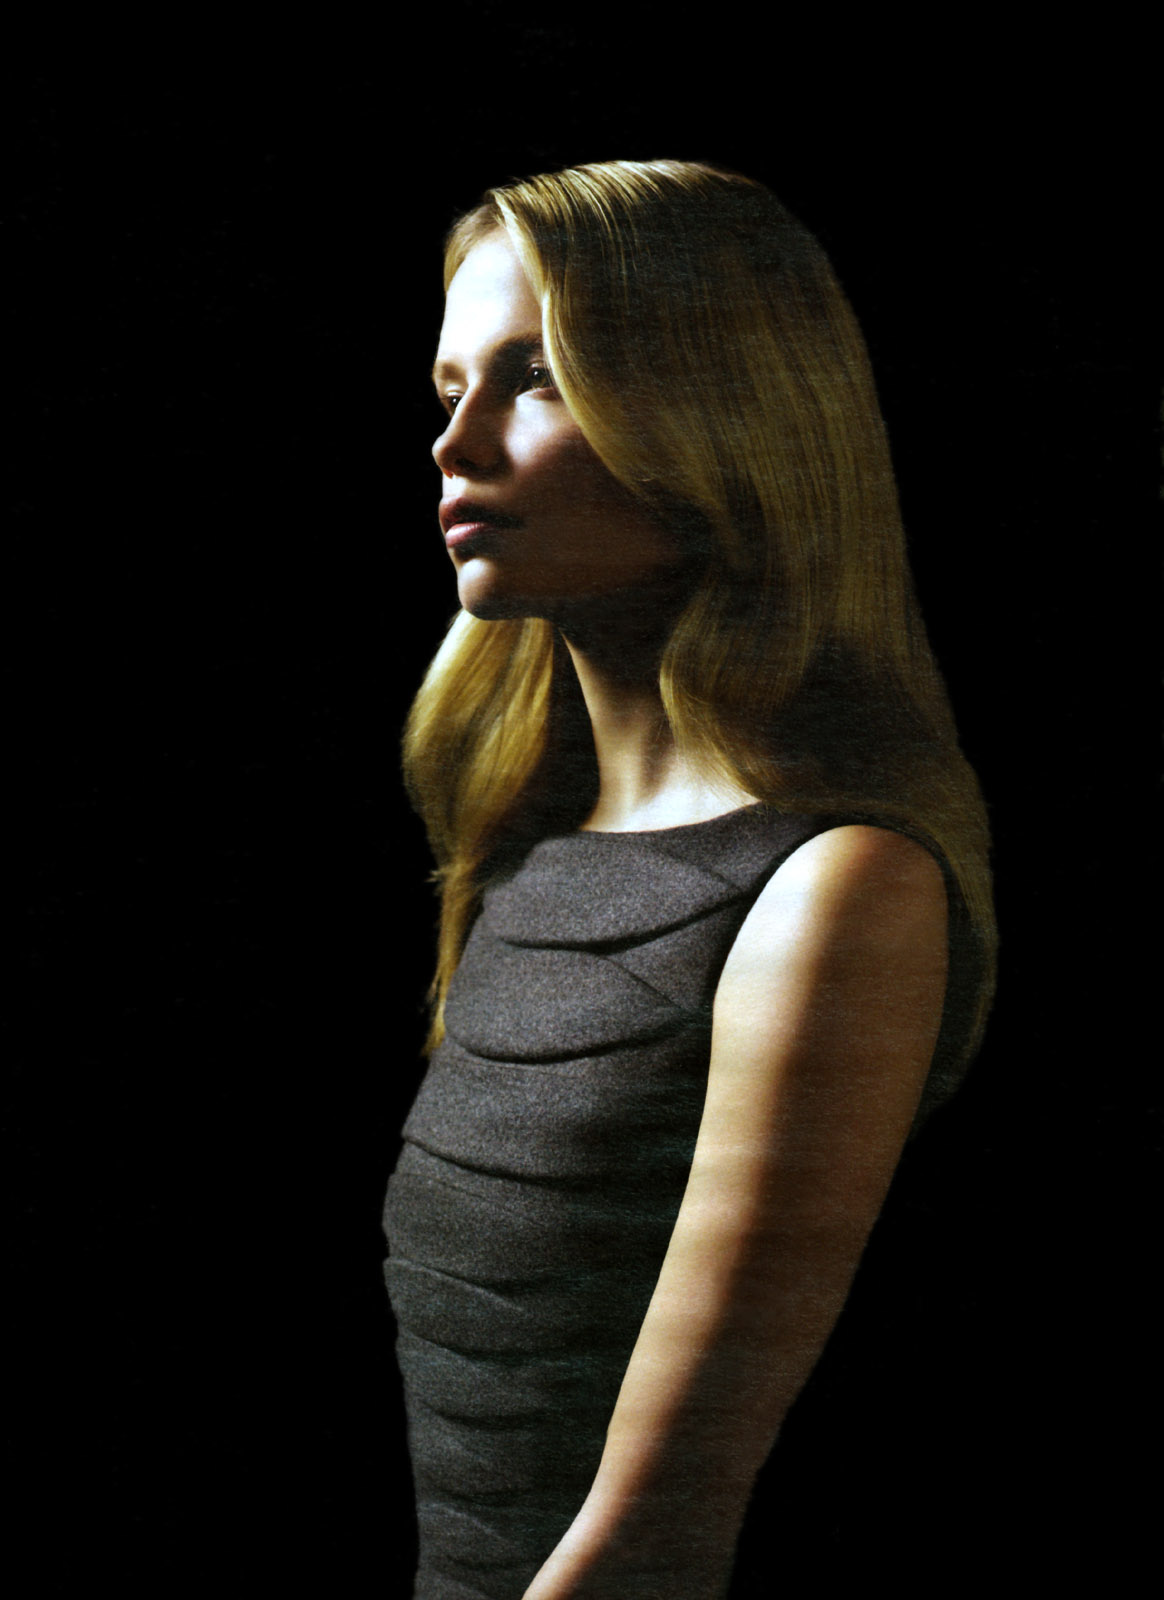 [Natasha+Poly+Jil+Sander+fall+2008+campaign,+ph+Willy+Vanderperre+stylist+Olivier+Rizzo+Makeup+Peter+Phillips+Hair+Didier+Malige+Women+Management+Blog+2.jpg]